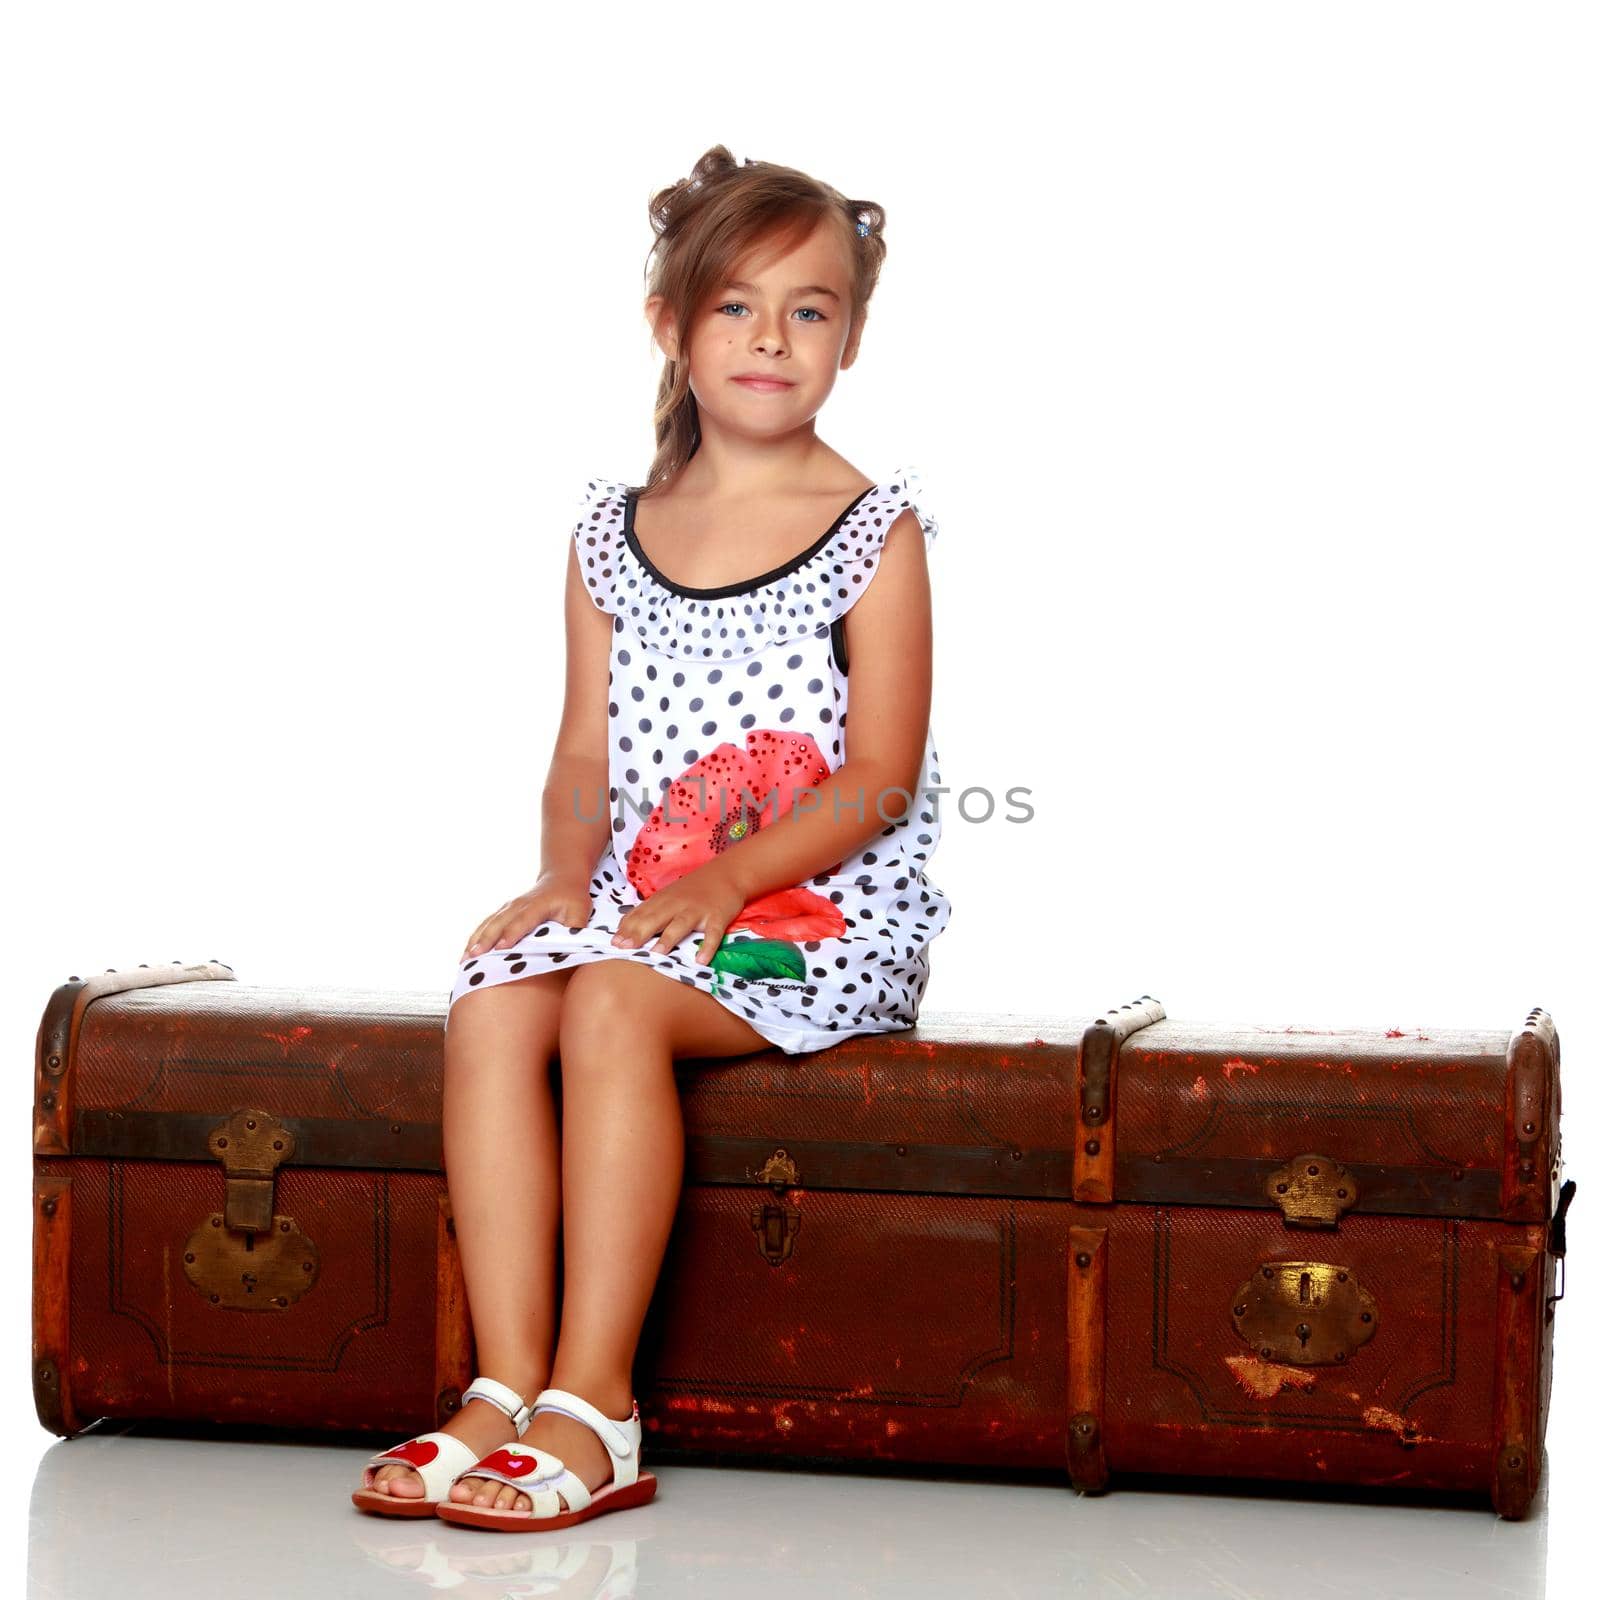 Little girl is sitting on a wooden box. Isolated on white background.